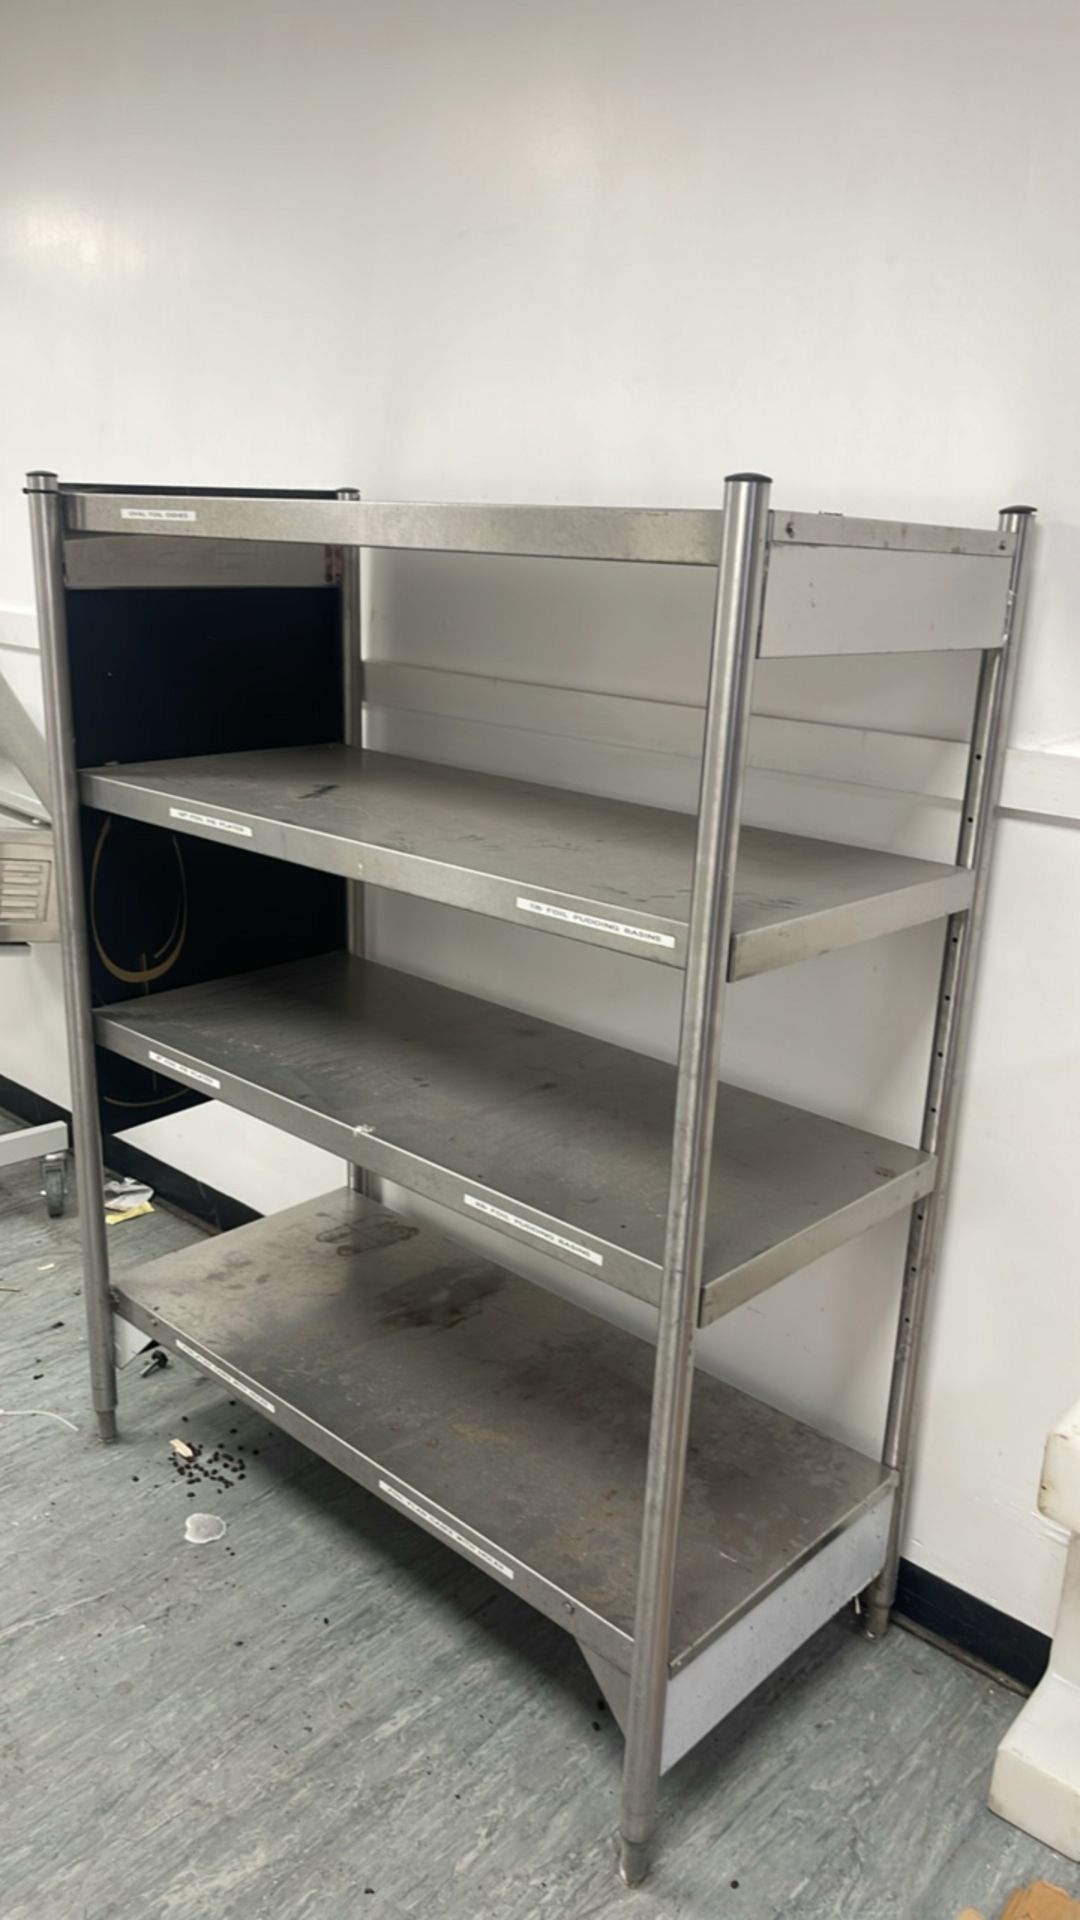 4 Shelve Stainless Steel Unit - Image 4 of 5